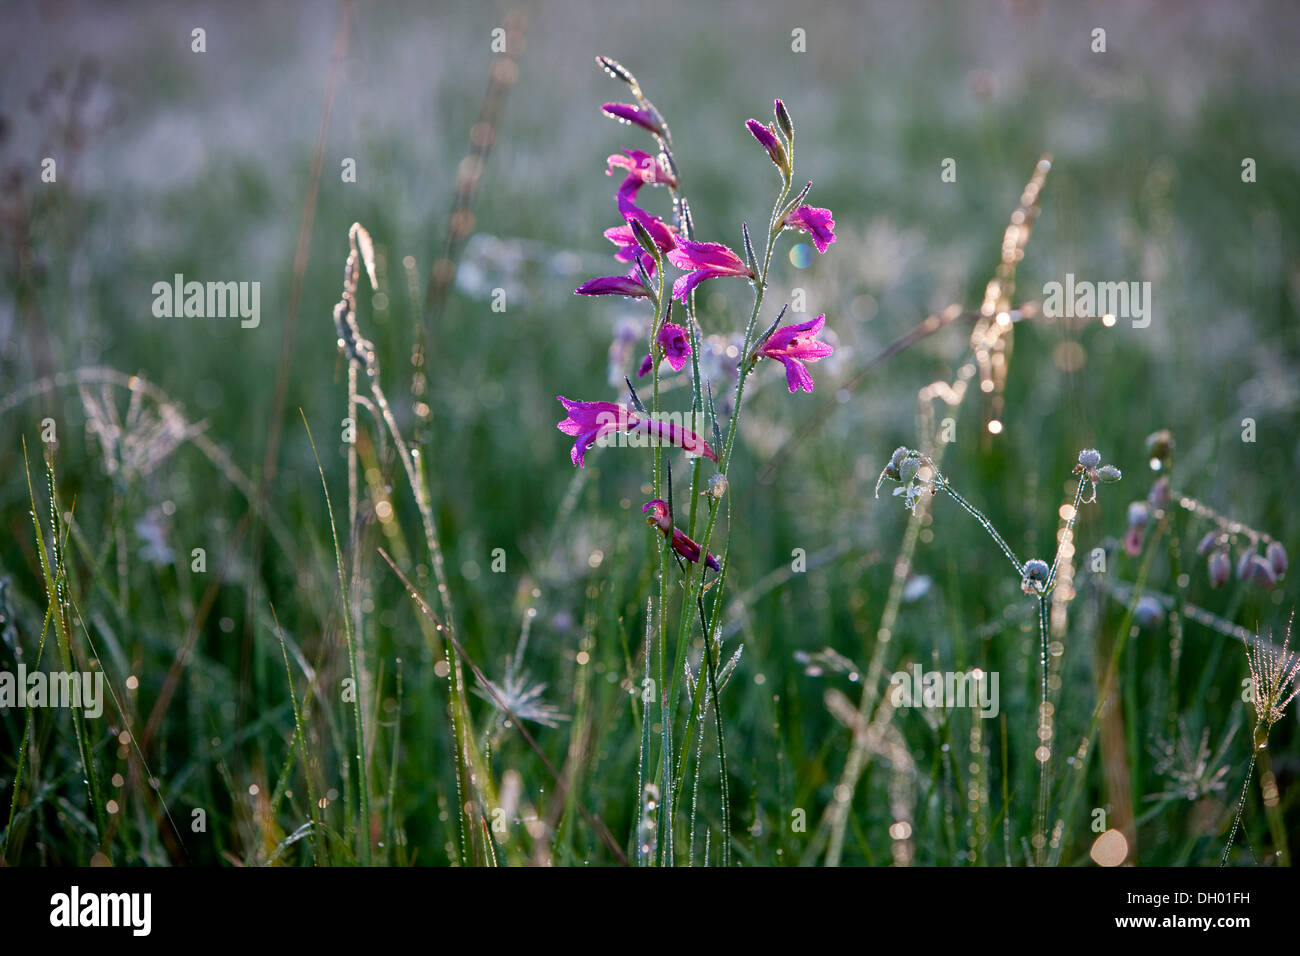 Bellflower (Campanula) with morning dew, France Stock Photo